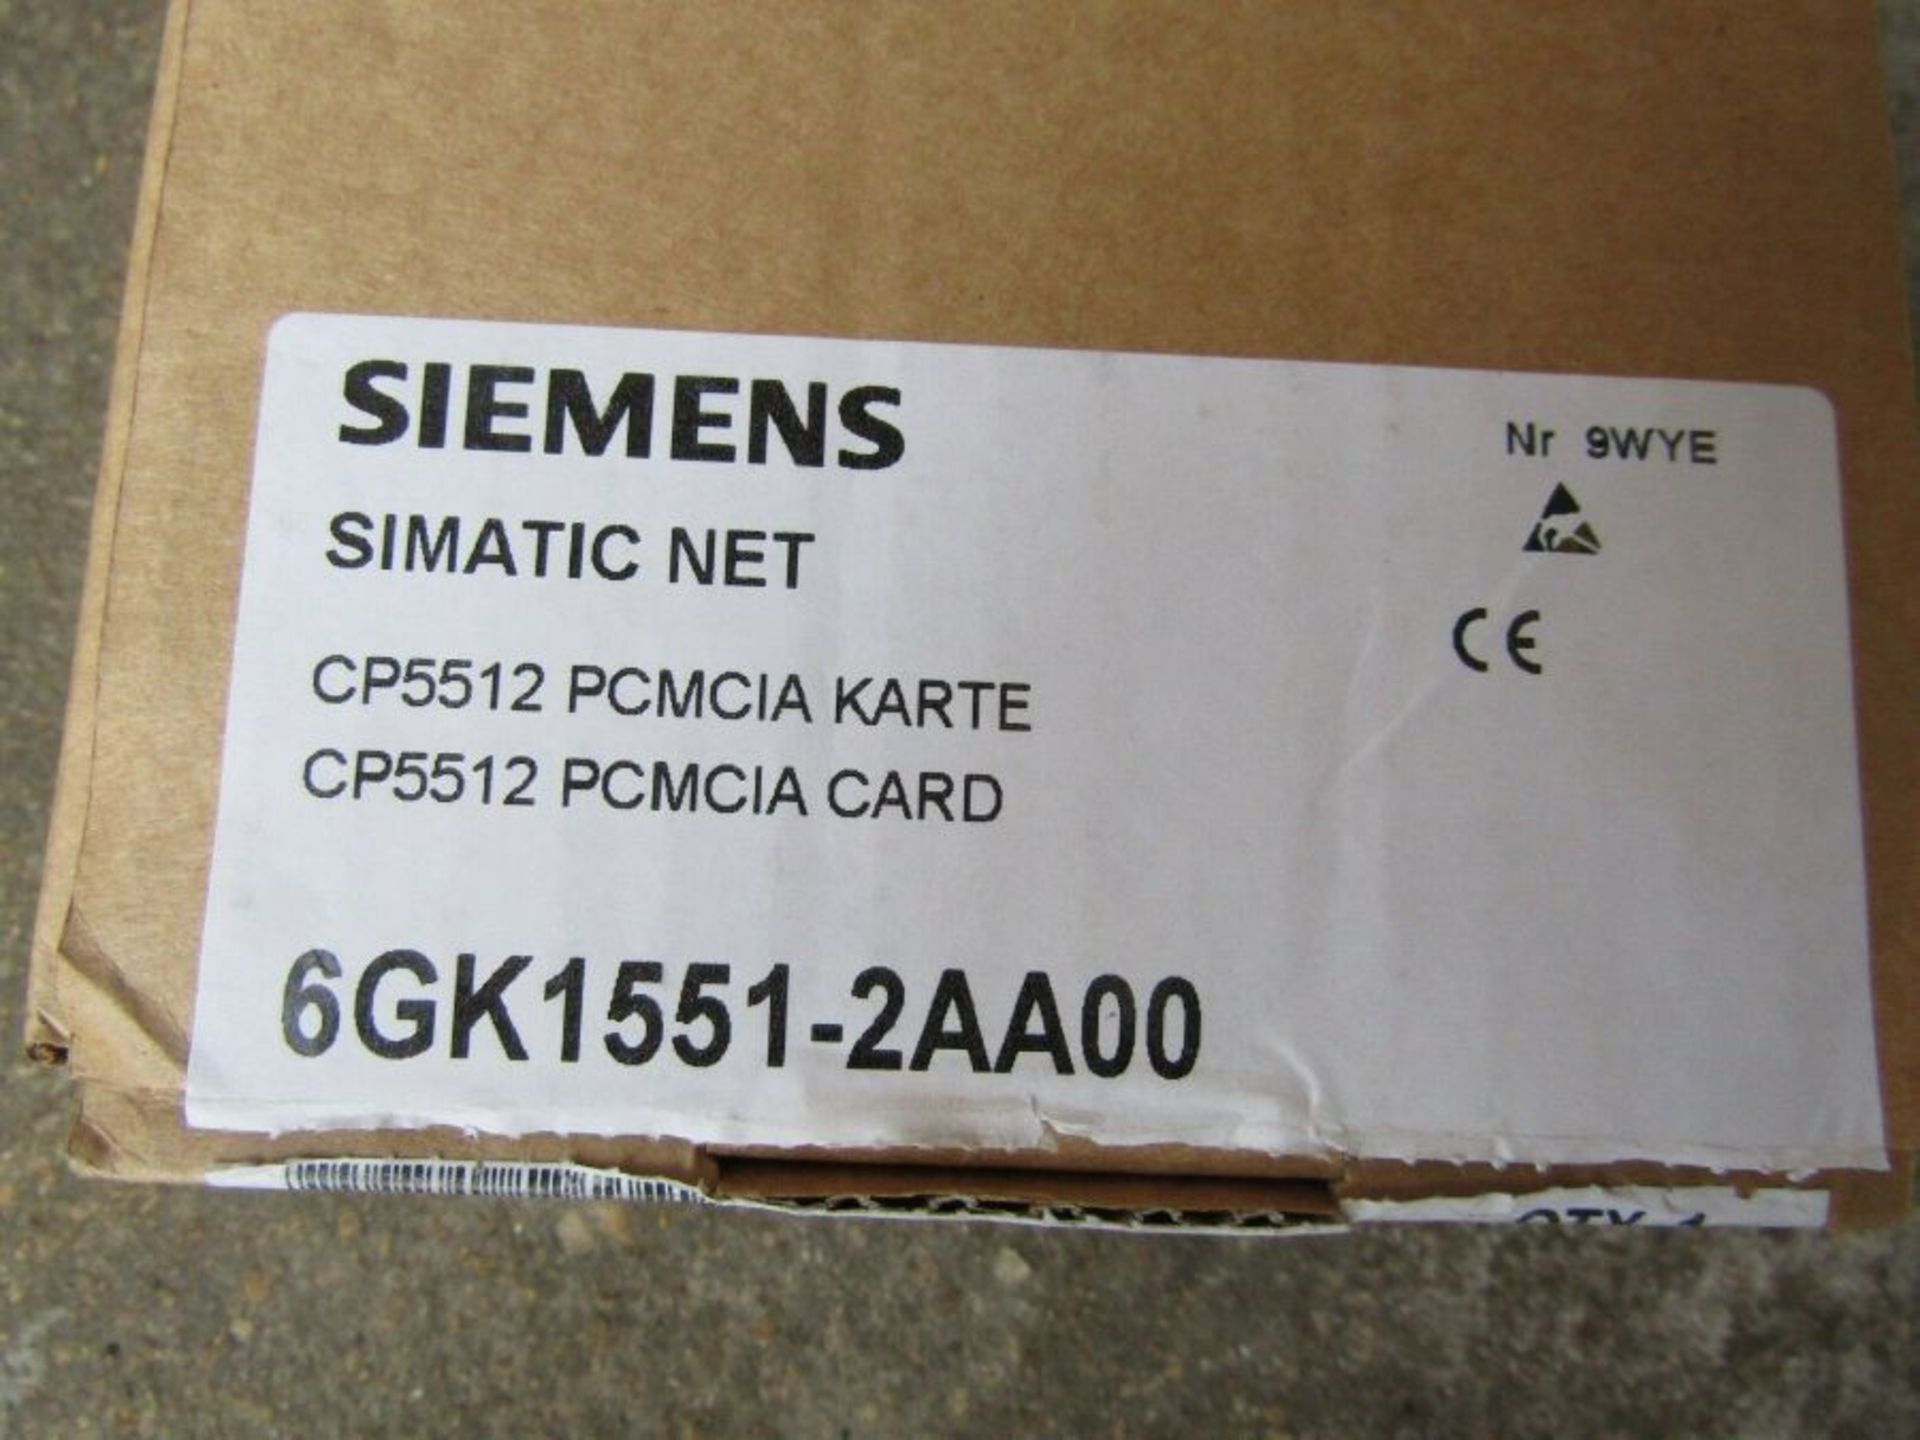 Siemens System Connection Kit for SIMATIC S7 Series PCMCIA - B714 113777 - Image 5 of 6